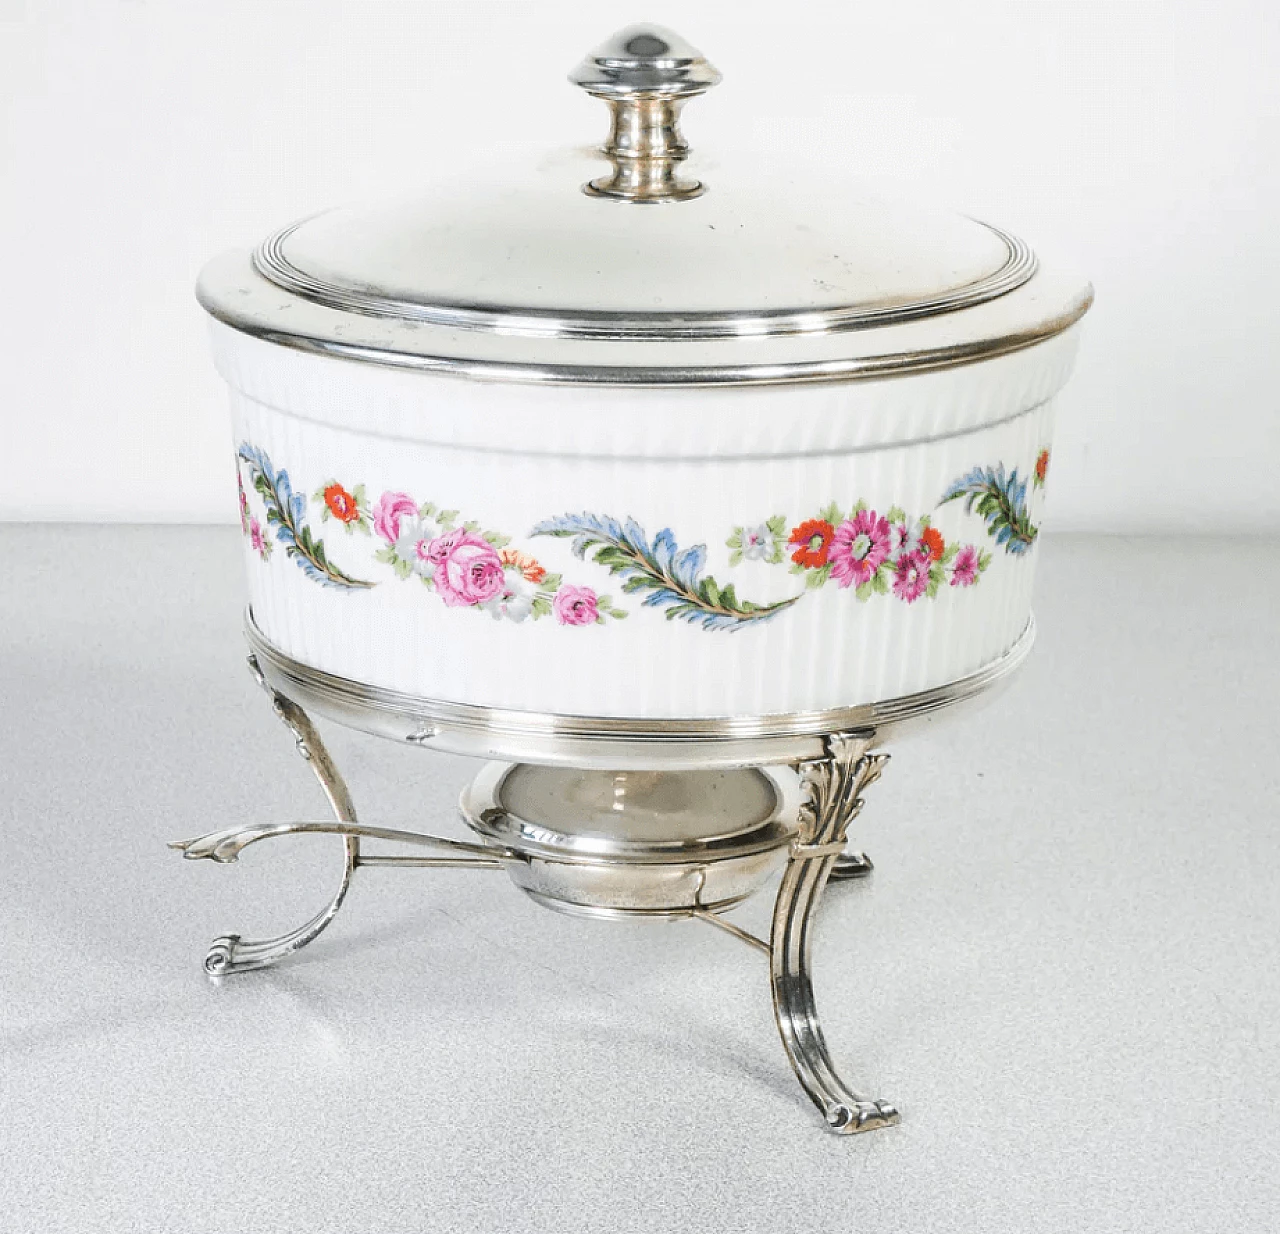 Silver food warmer with porcelain container by CESA Alessandria, mid-19th century 1